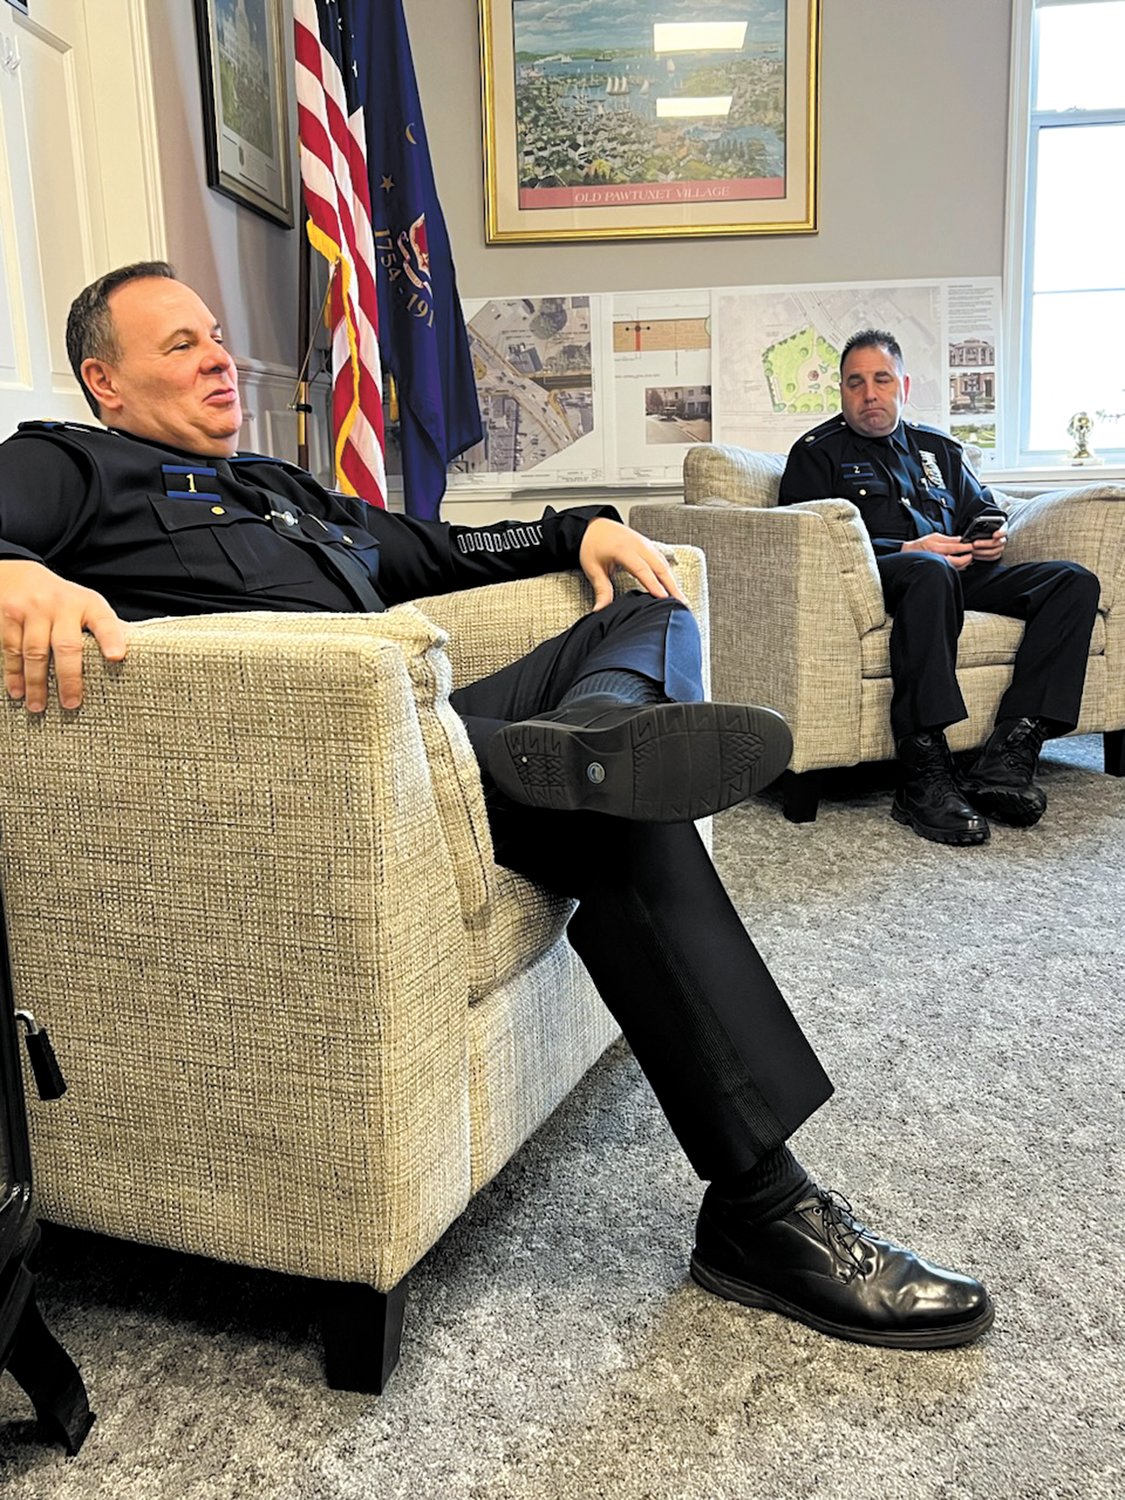 LAYING OUT THE FACTS: Police Chief Col. Michael J. Winquist and Major Todd Patalano sit down to discuss the numerous steps the department has taken to reduce the levels of noise from the gun range. (Photo courtesy of Cranston Chief of Staff Anthony Moretti)